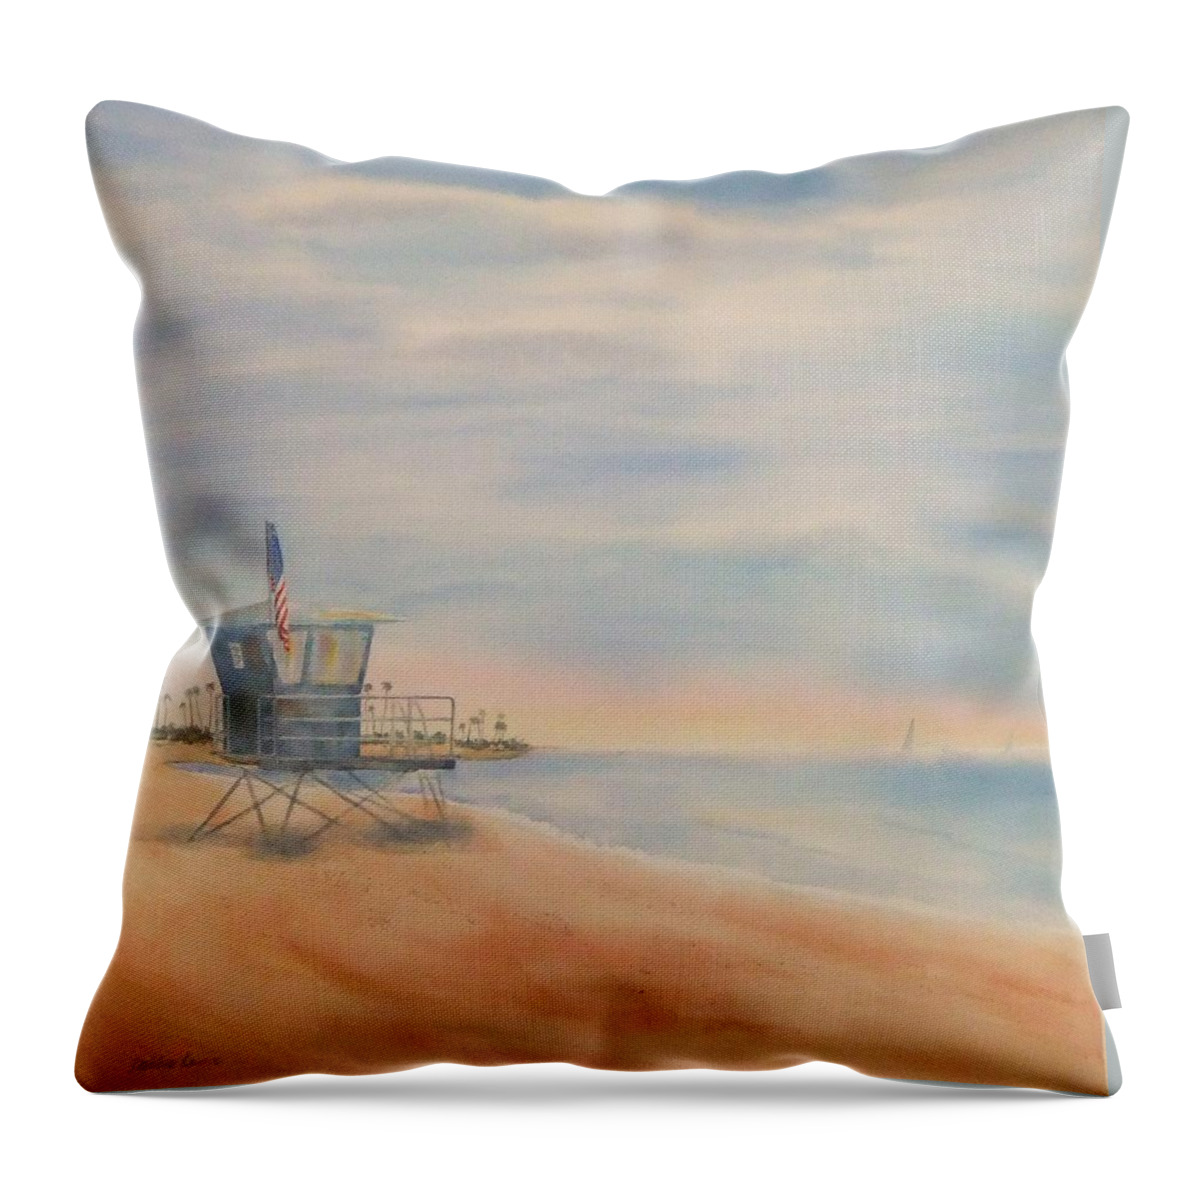 Watercolor Landscape Throw Pillow featuring the painting Morning by the Beach by Debbie Lewis